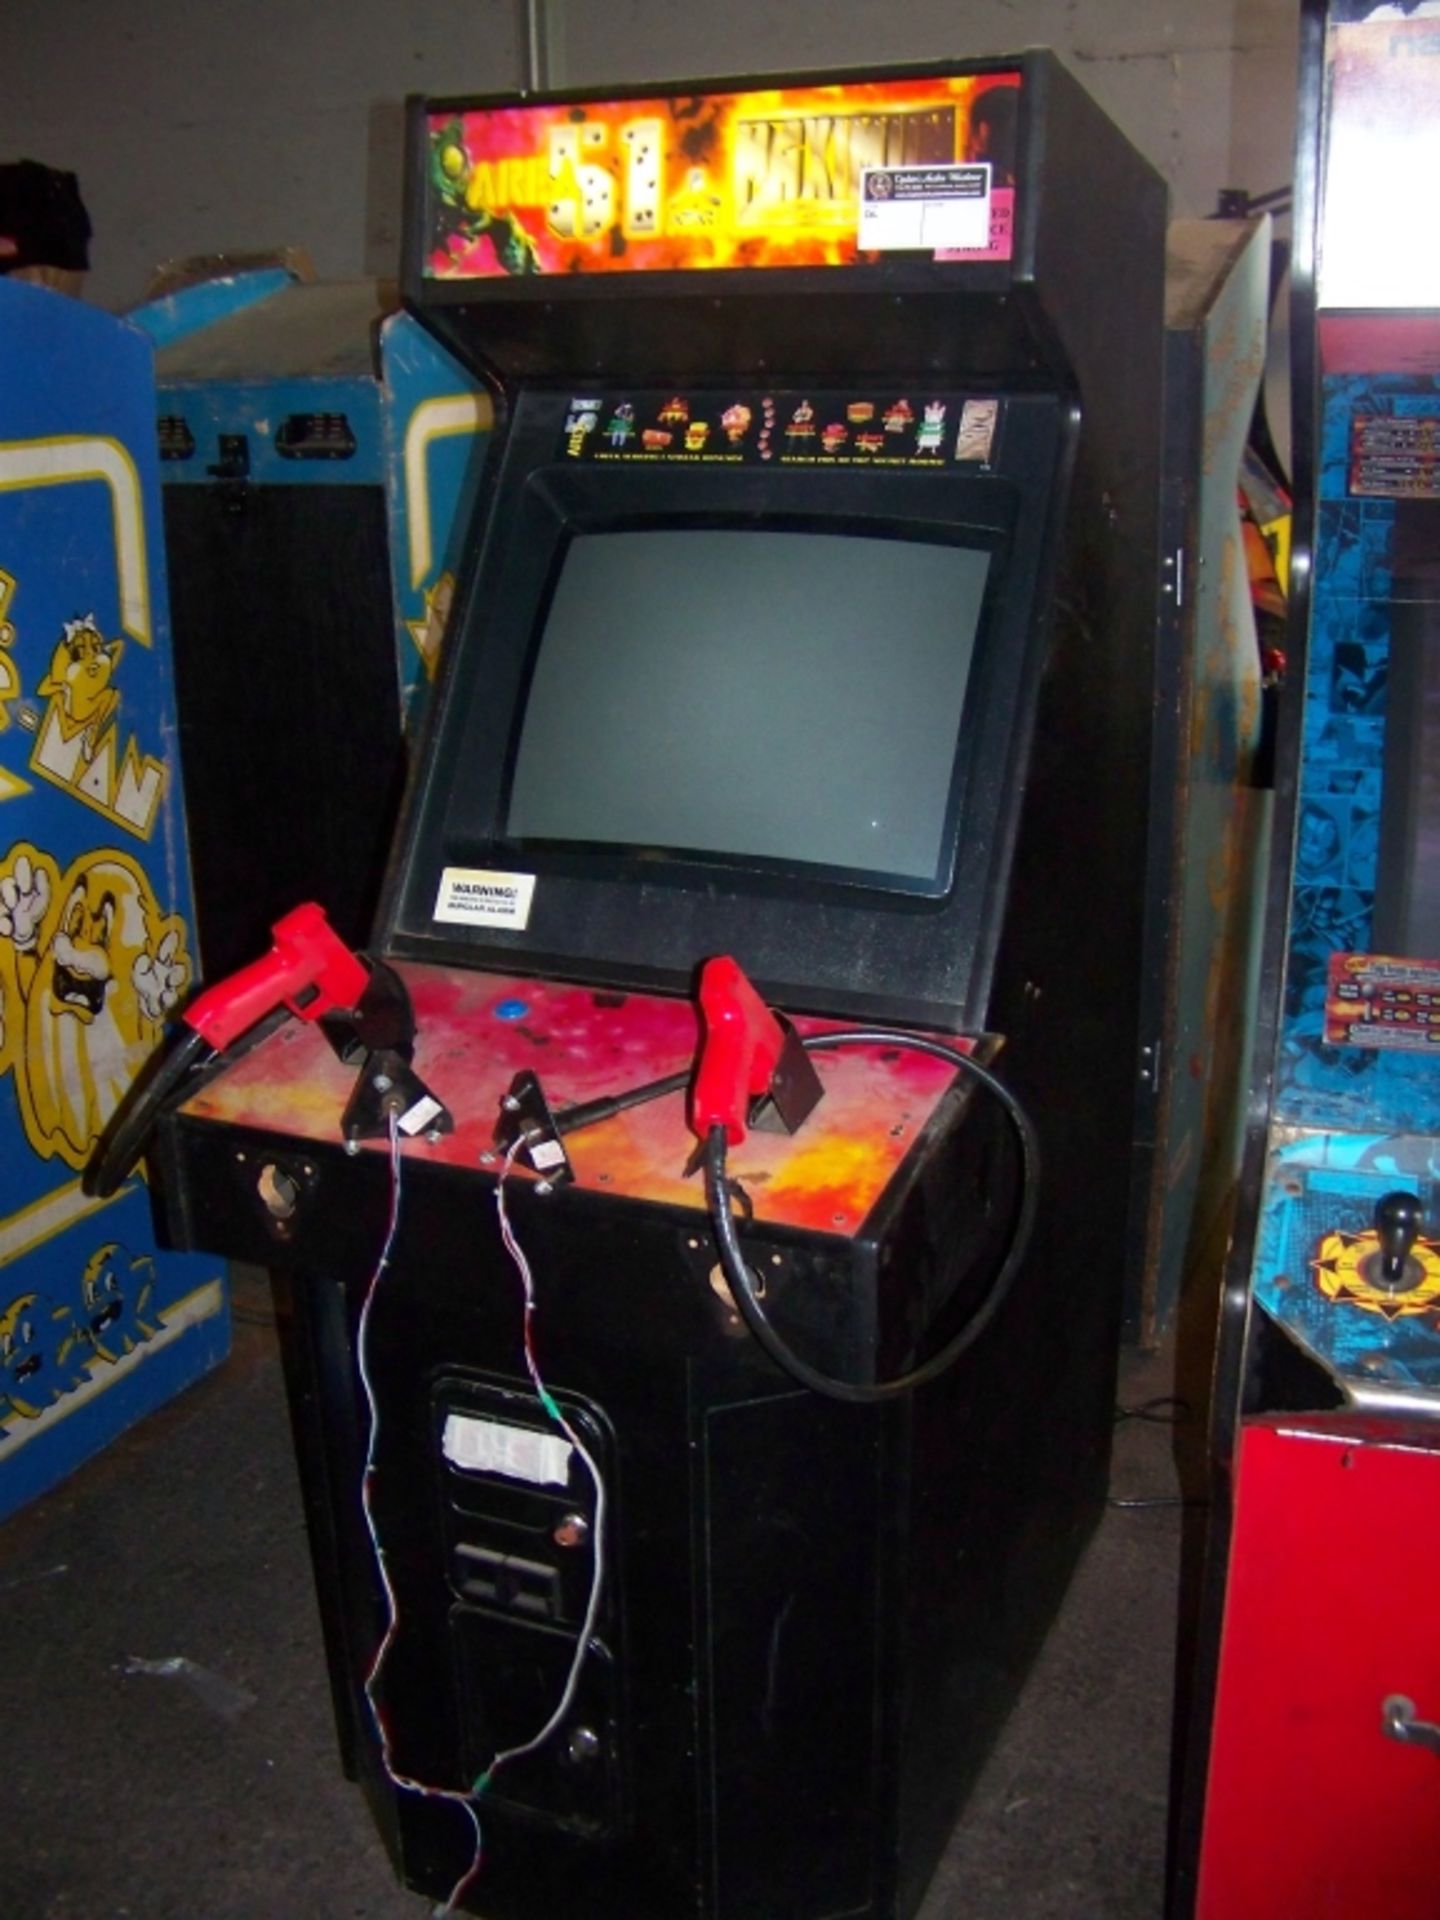 AREA 51 MAX FORCE COMBO UPRIGHT ARCADE GAME - Image 2 of 3